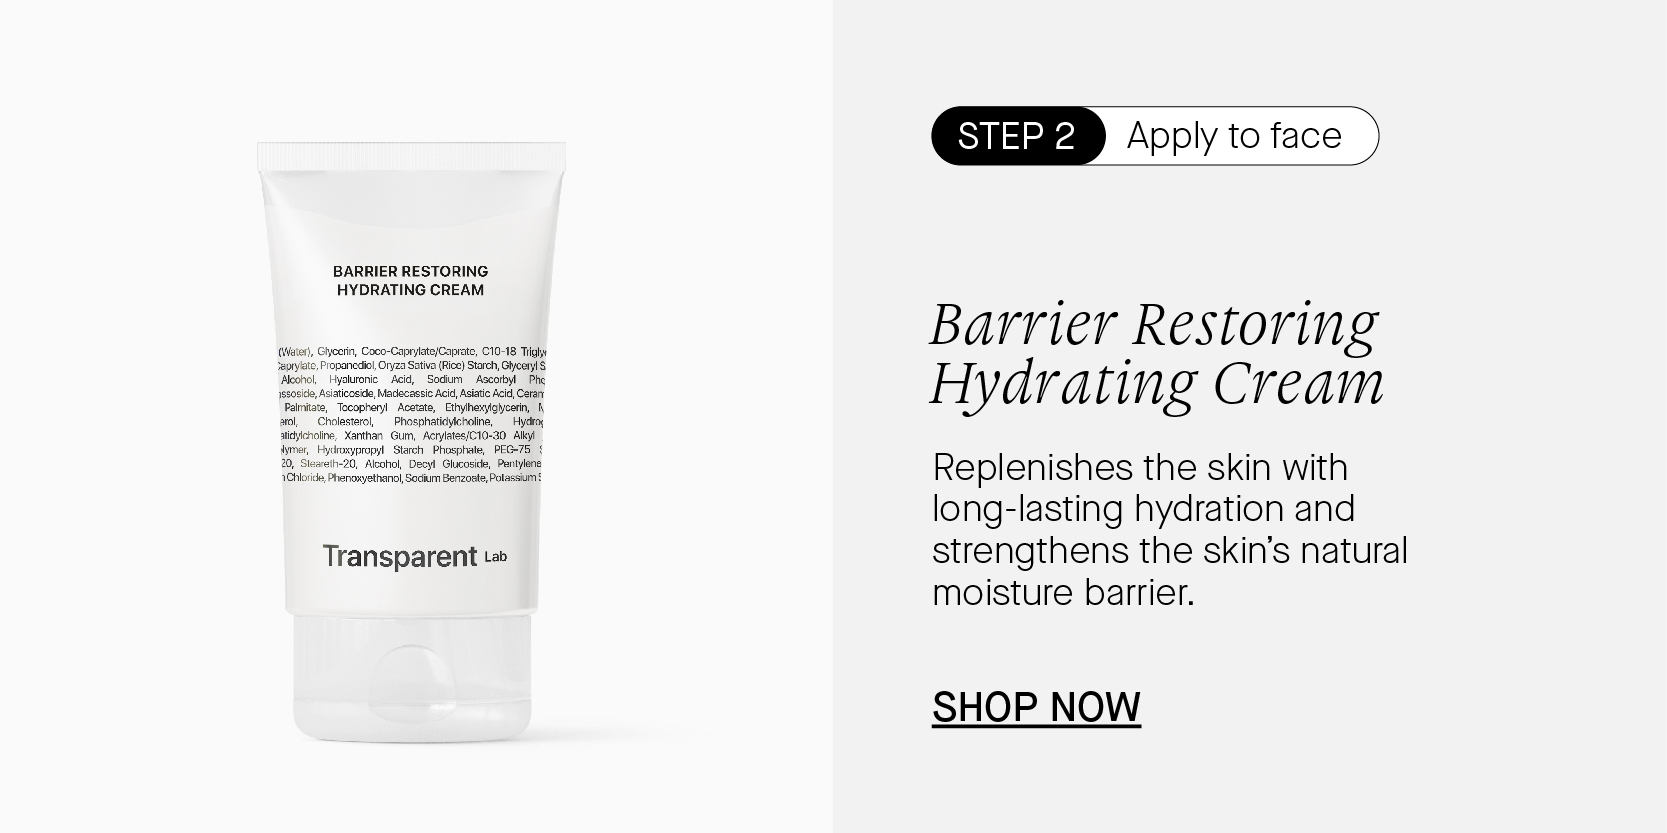 BARRIER RESTORING HYDRATING CREAM Transparent Le IS Apply to face Barrier Restoring Hydrating Cream Replenishes the skin with long-lasting hydration and strengthens the skin's natural moisture barrier. SHOP NOW 